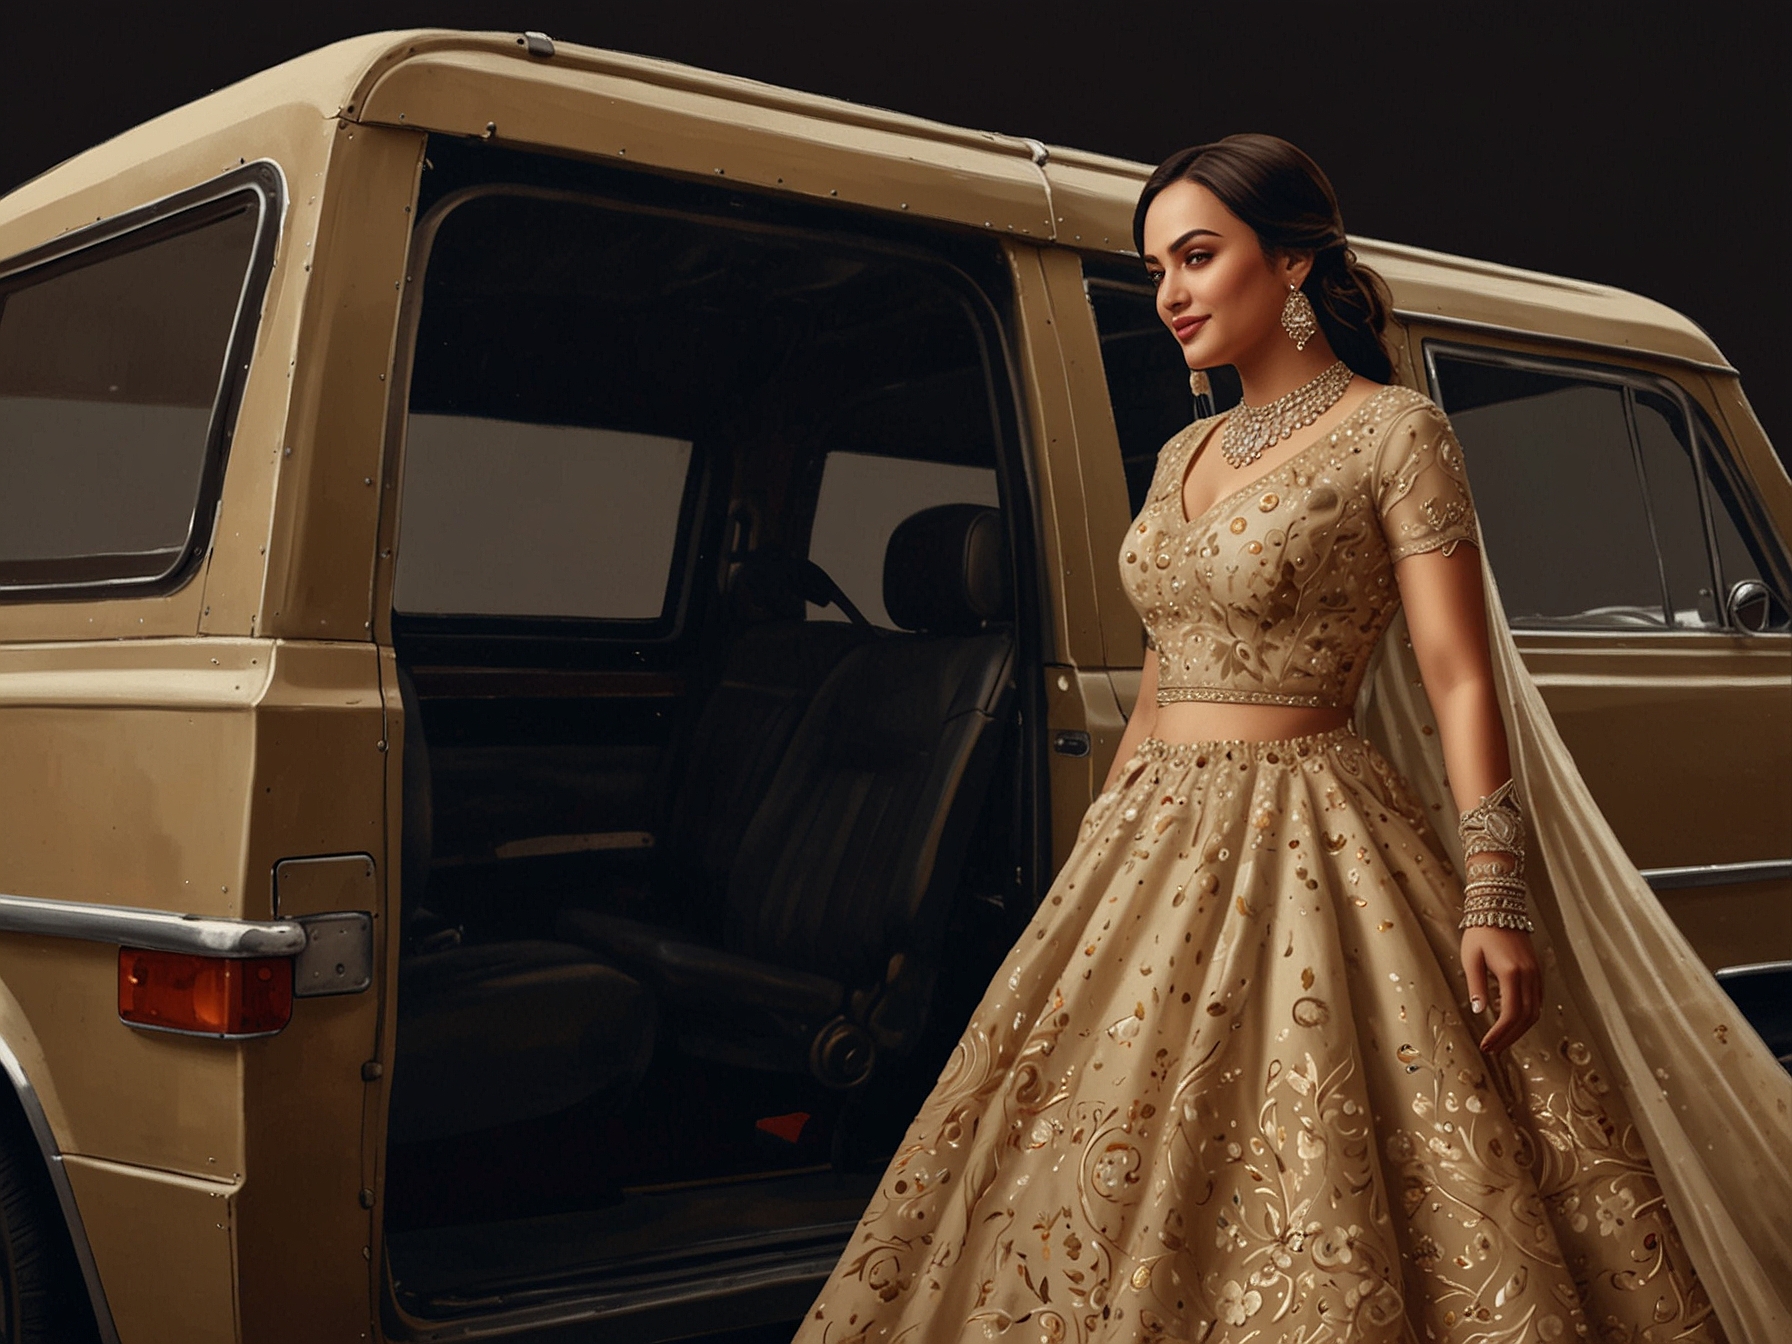 A snapshot of Sonakshi Sinha's beige wedding dress being carefully transported to her residence. The dress showcases ornate embroidery and delicate embellishments, hinting at an elegant and sophisticated affair.